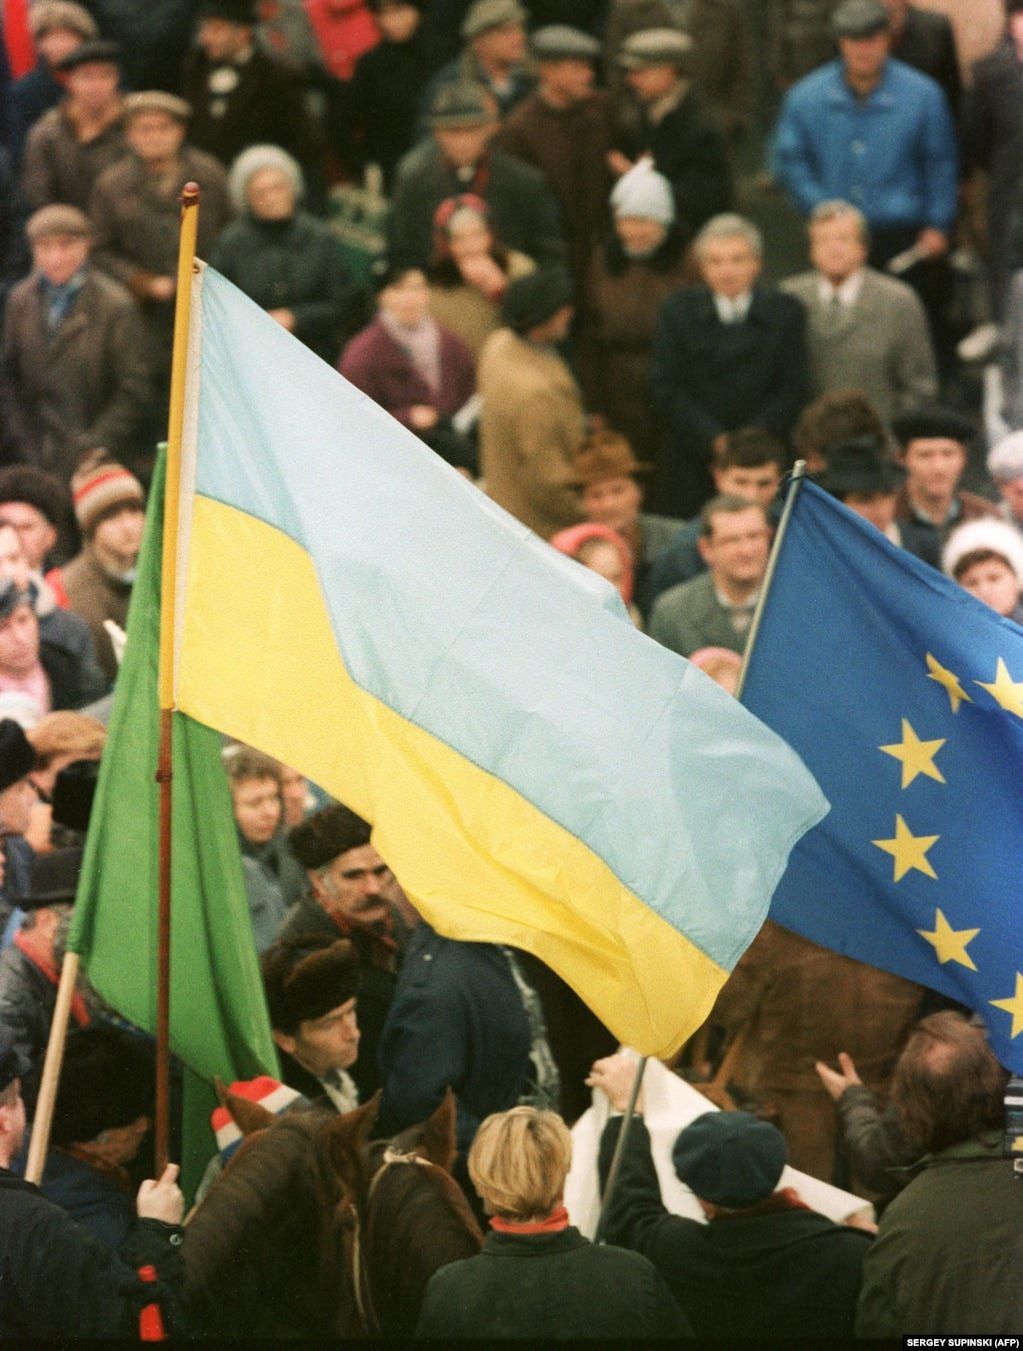 Both Ukrainian and European flags are seen during a pro-independence rally in Kyiv.